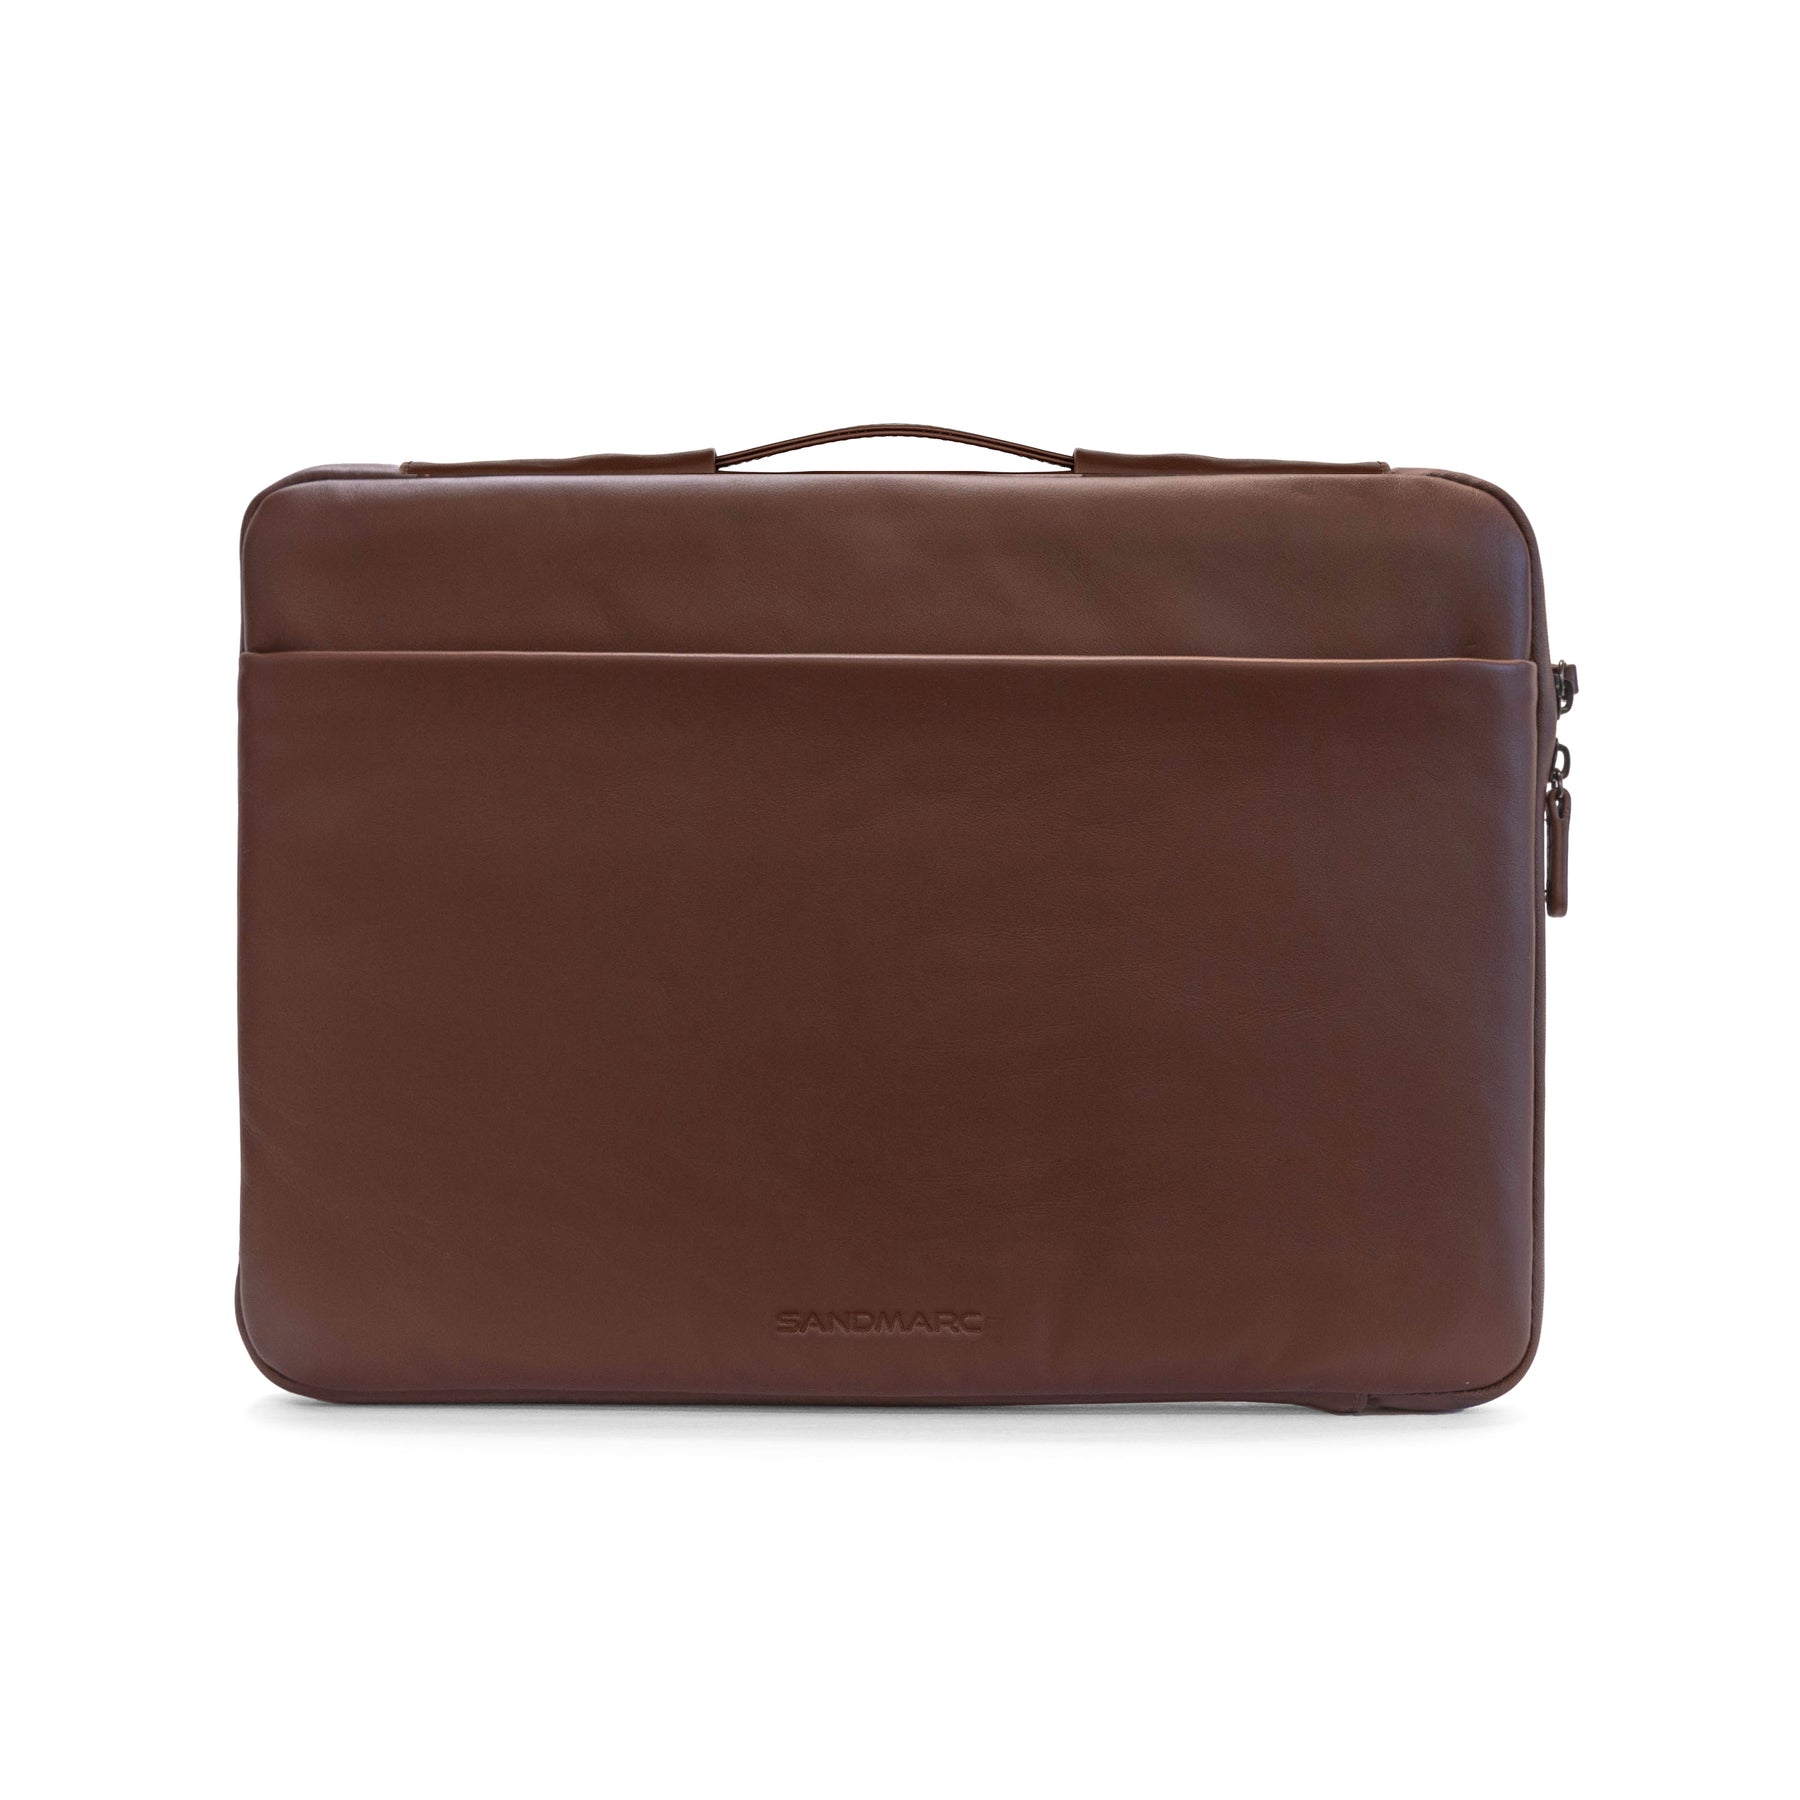 MacBook 16 & 15 Inch Leather Carrying Case - SANDMARC